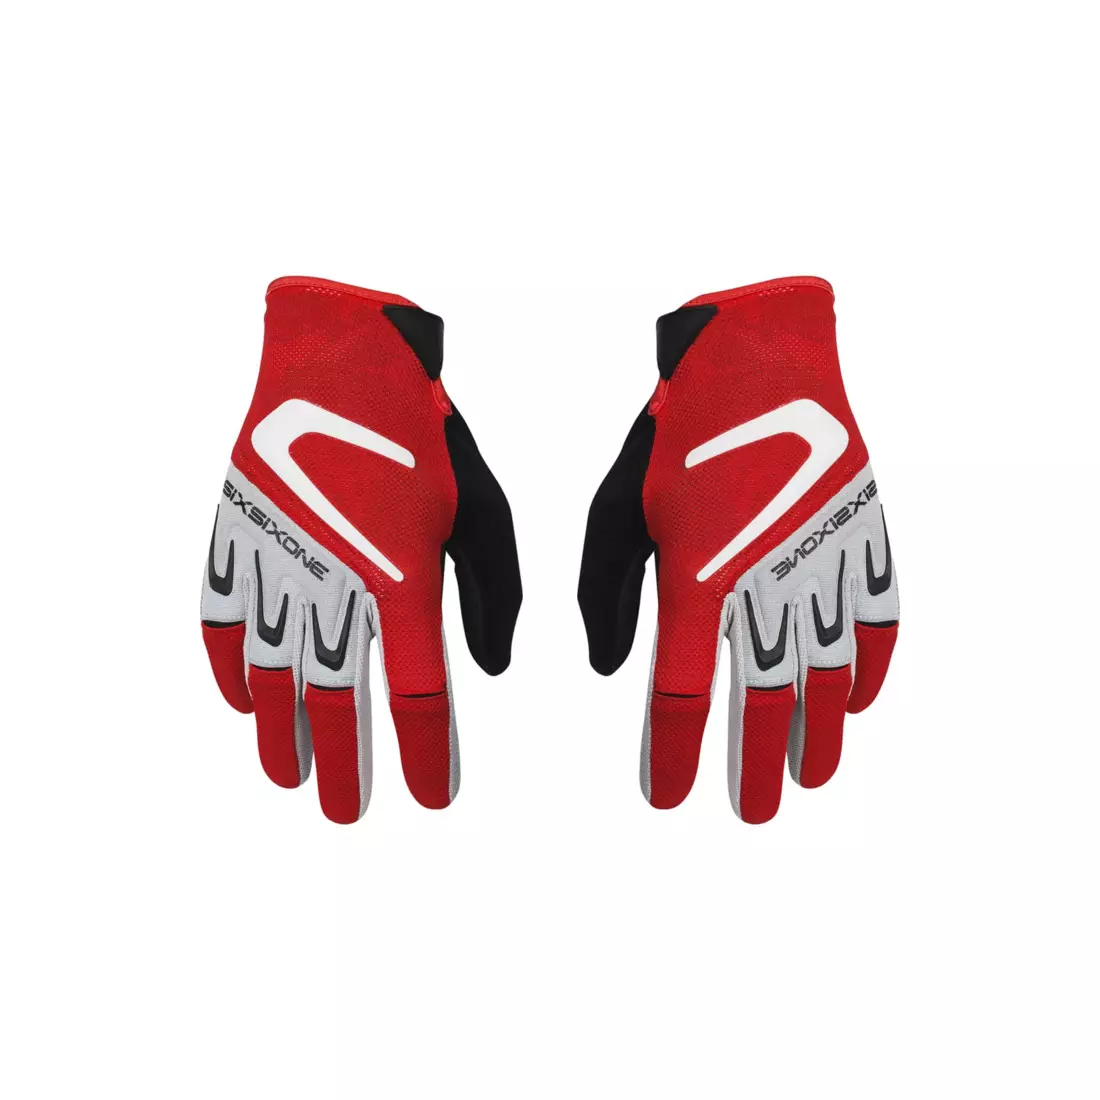 661 RAGE Men's cycling gloves, red